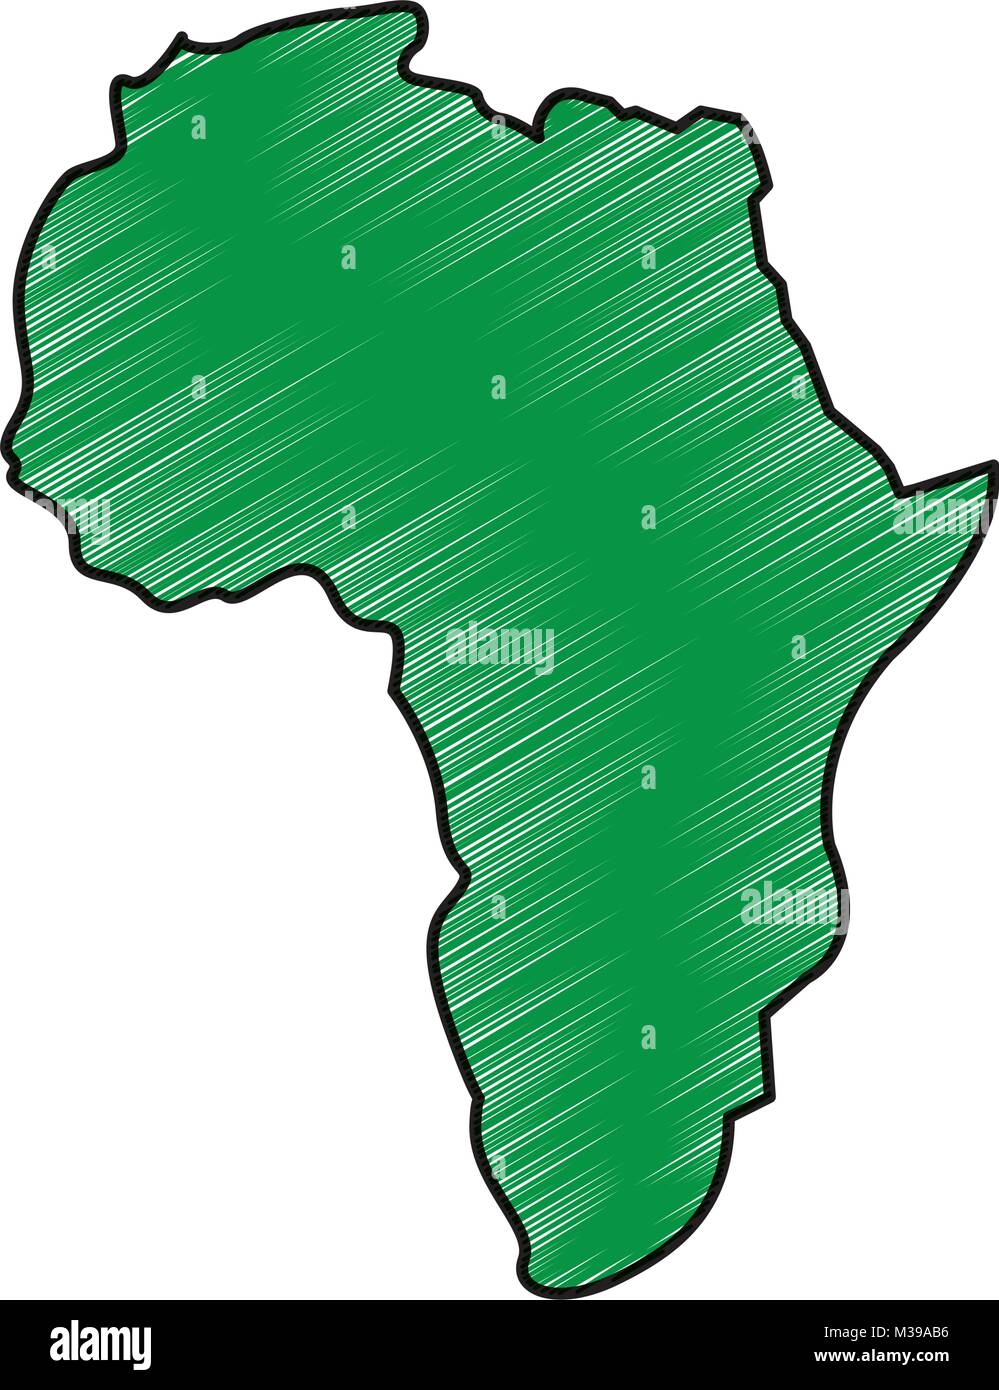 map of africa continent silhouette on a white background Stock Vector